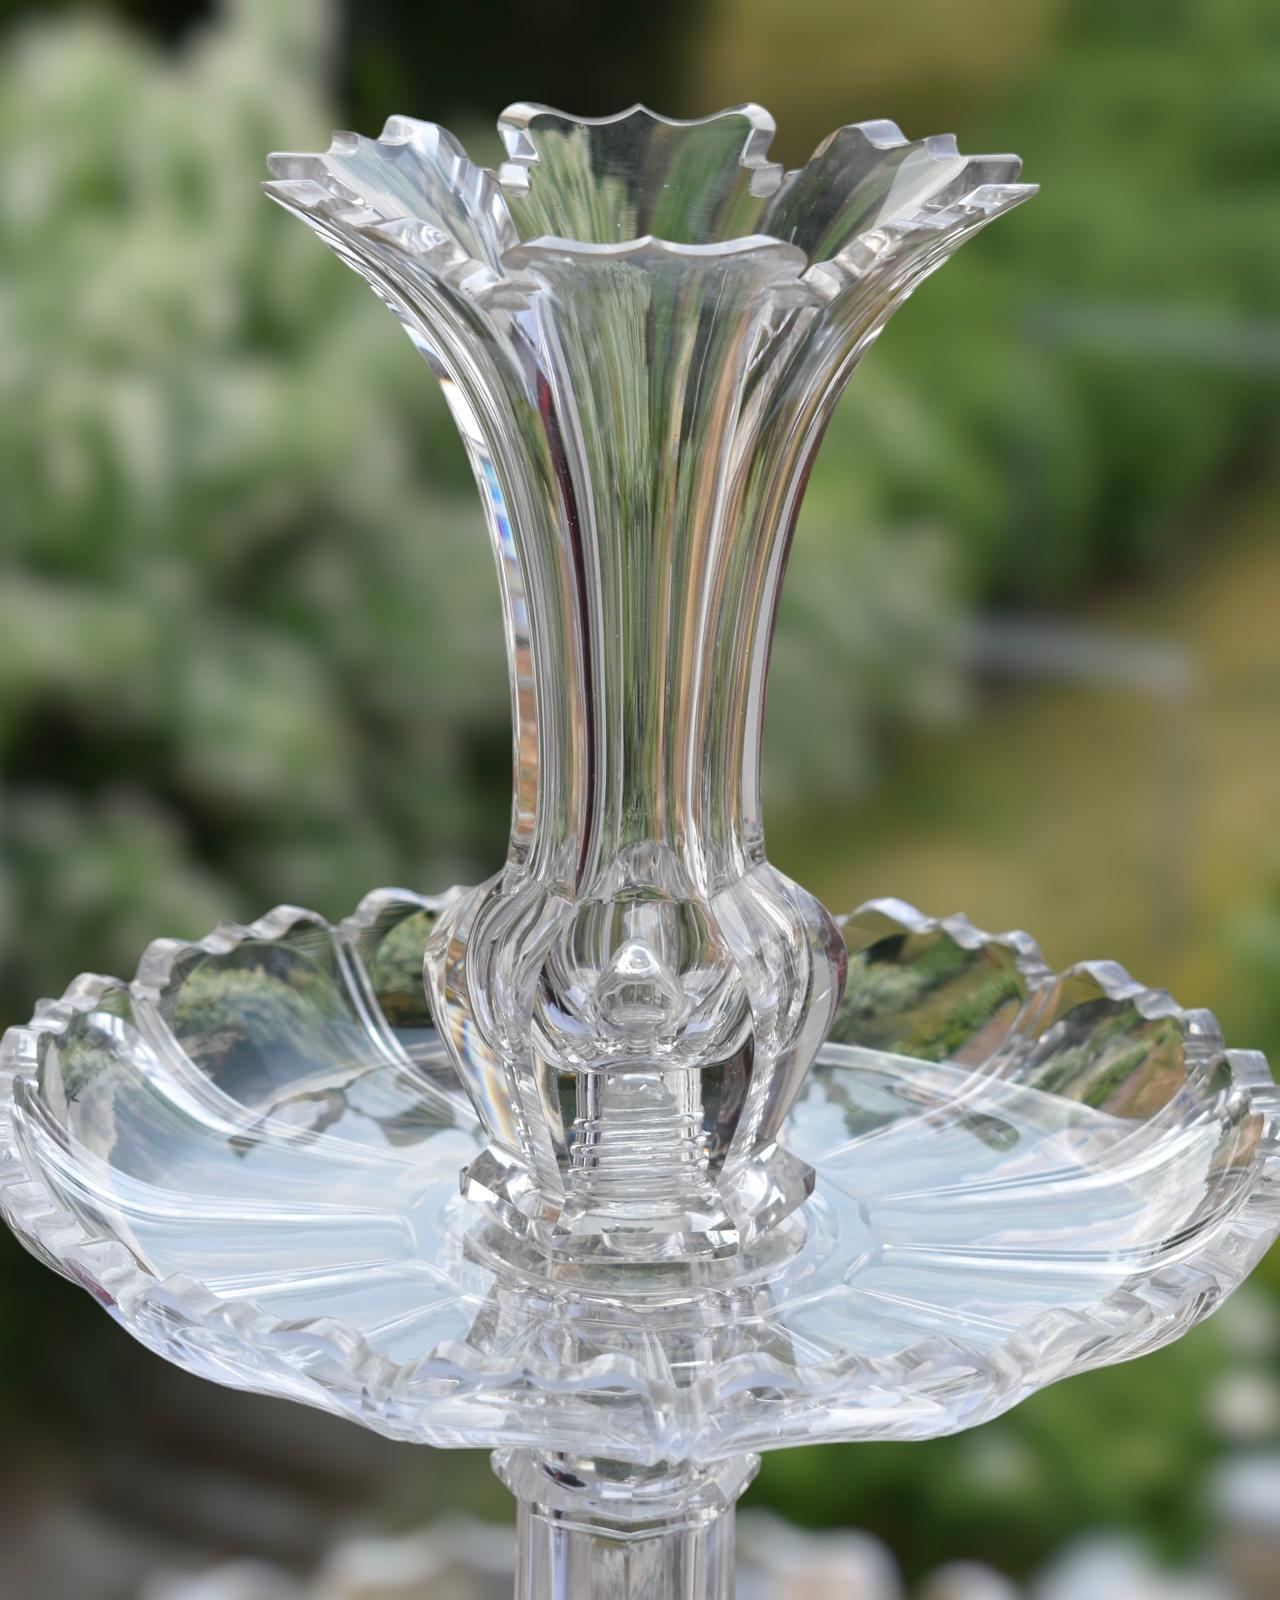 Large Antique Baccarat Crystal Glass Epergne, Centerpiece, 19th Century In Good Condition For Sale In Rostock, MV